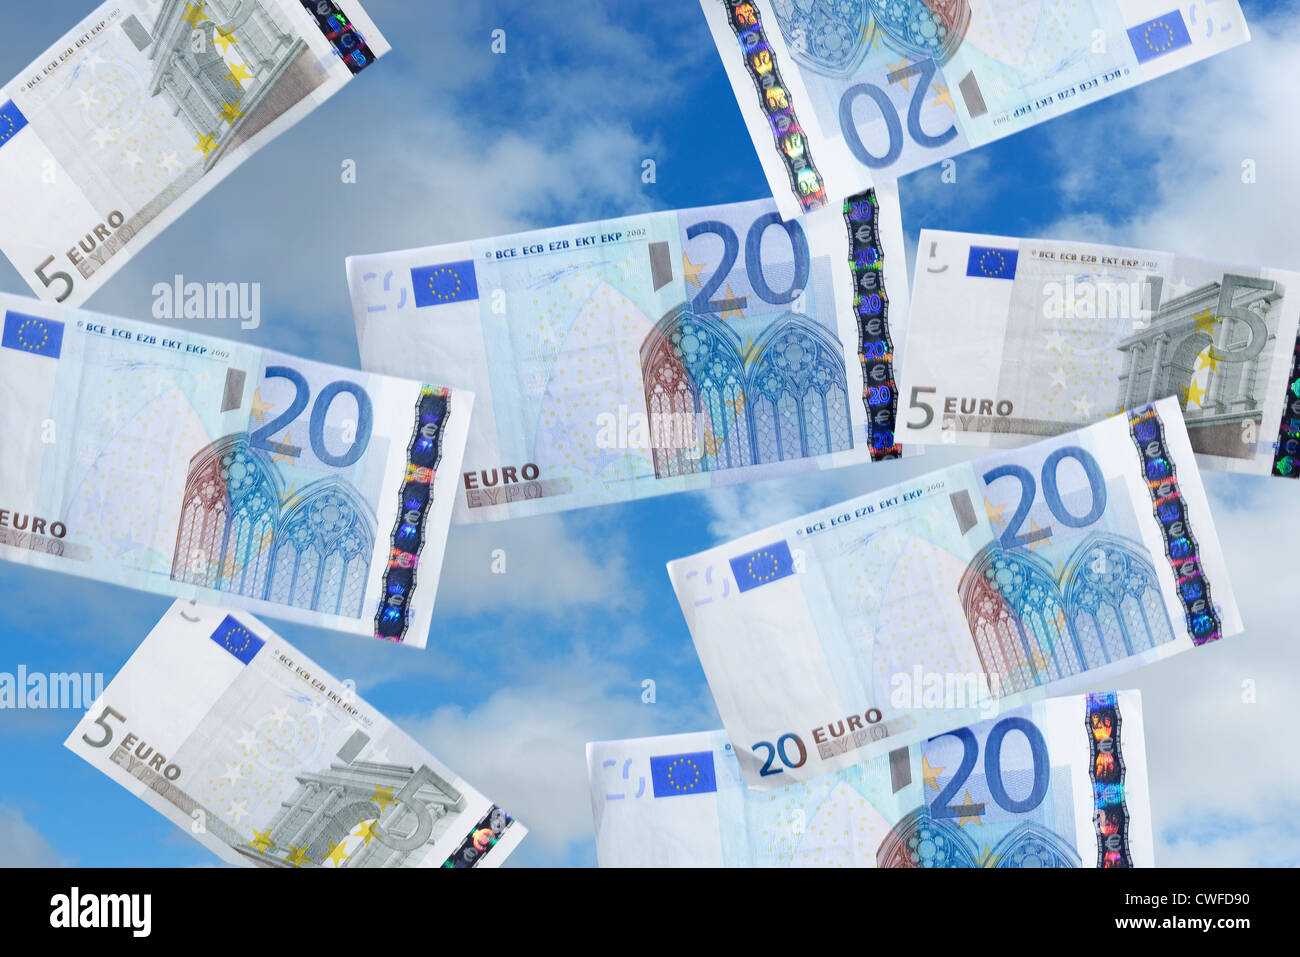 Euro money notes falling from the sky Stock Photo